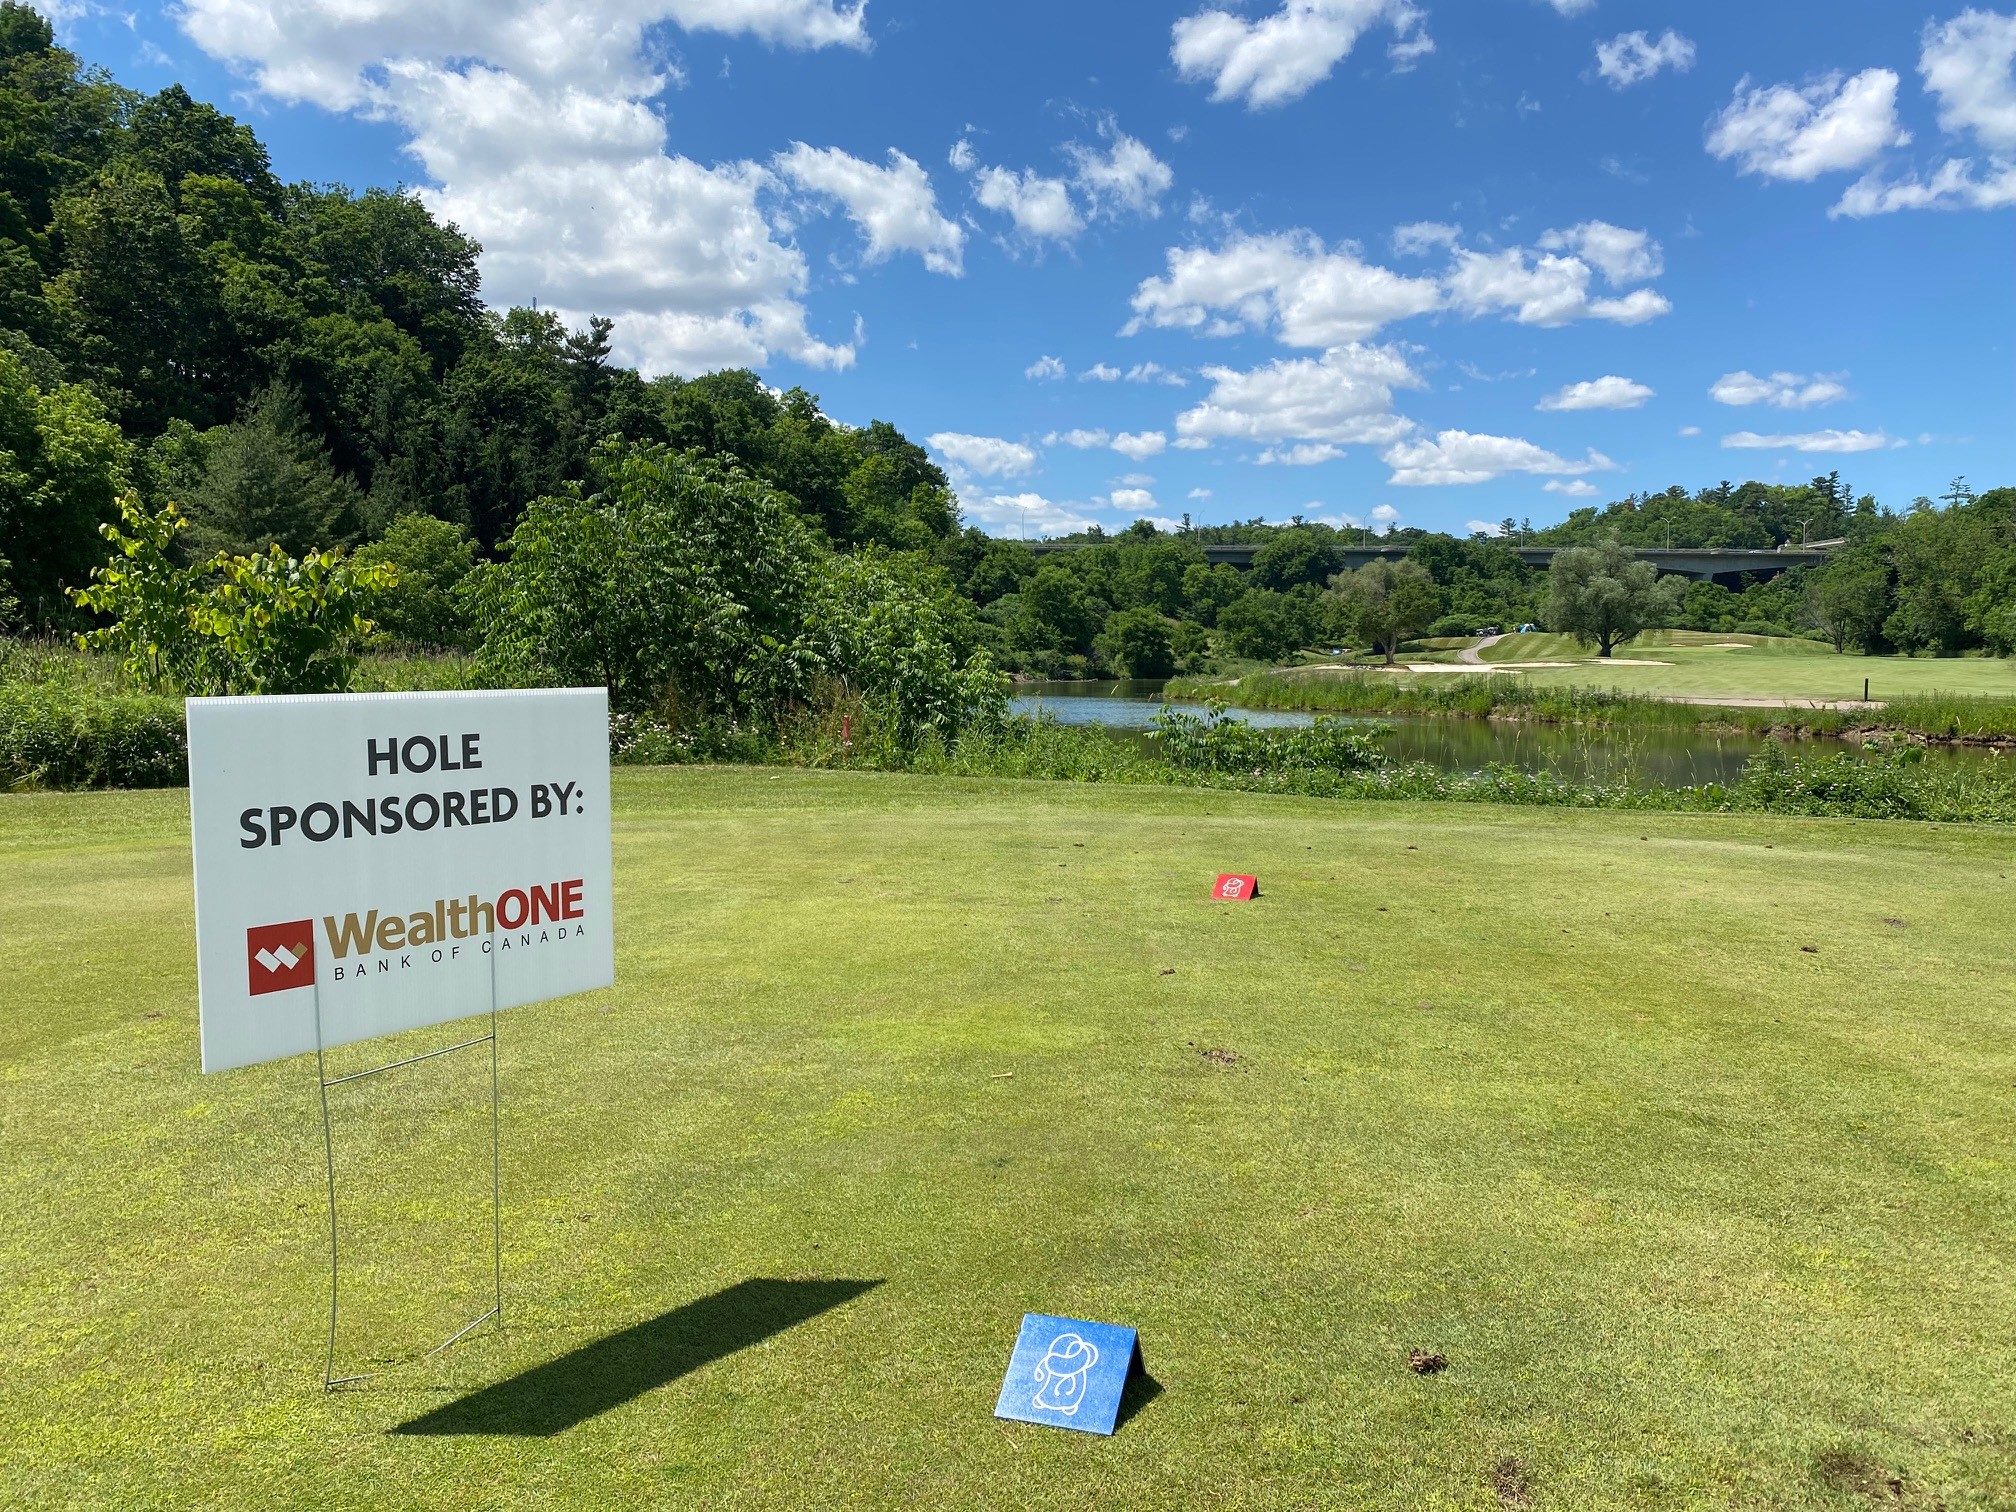 WealthONE logo at the sponsored hole 